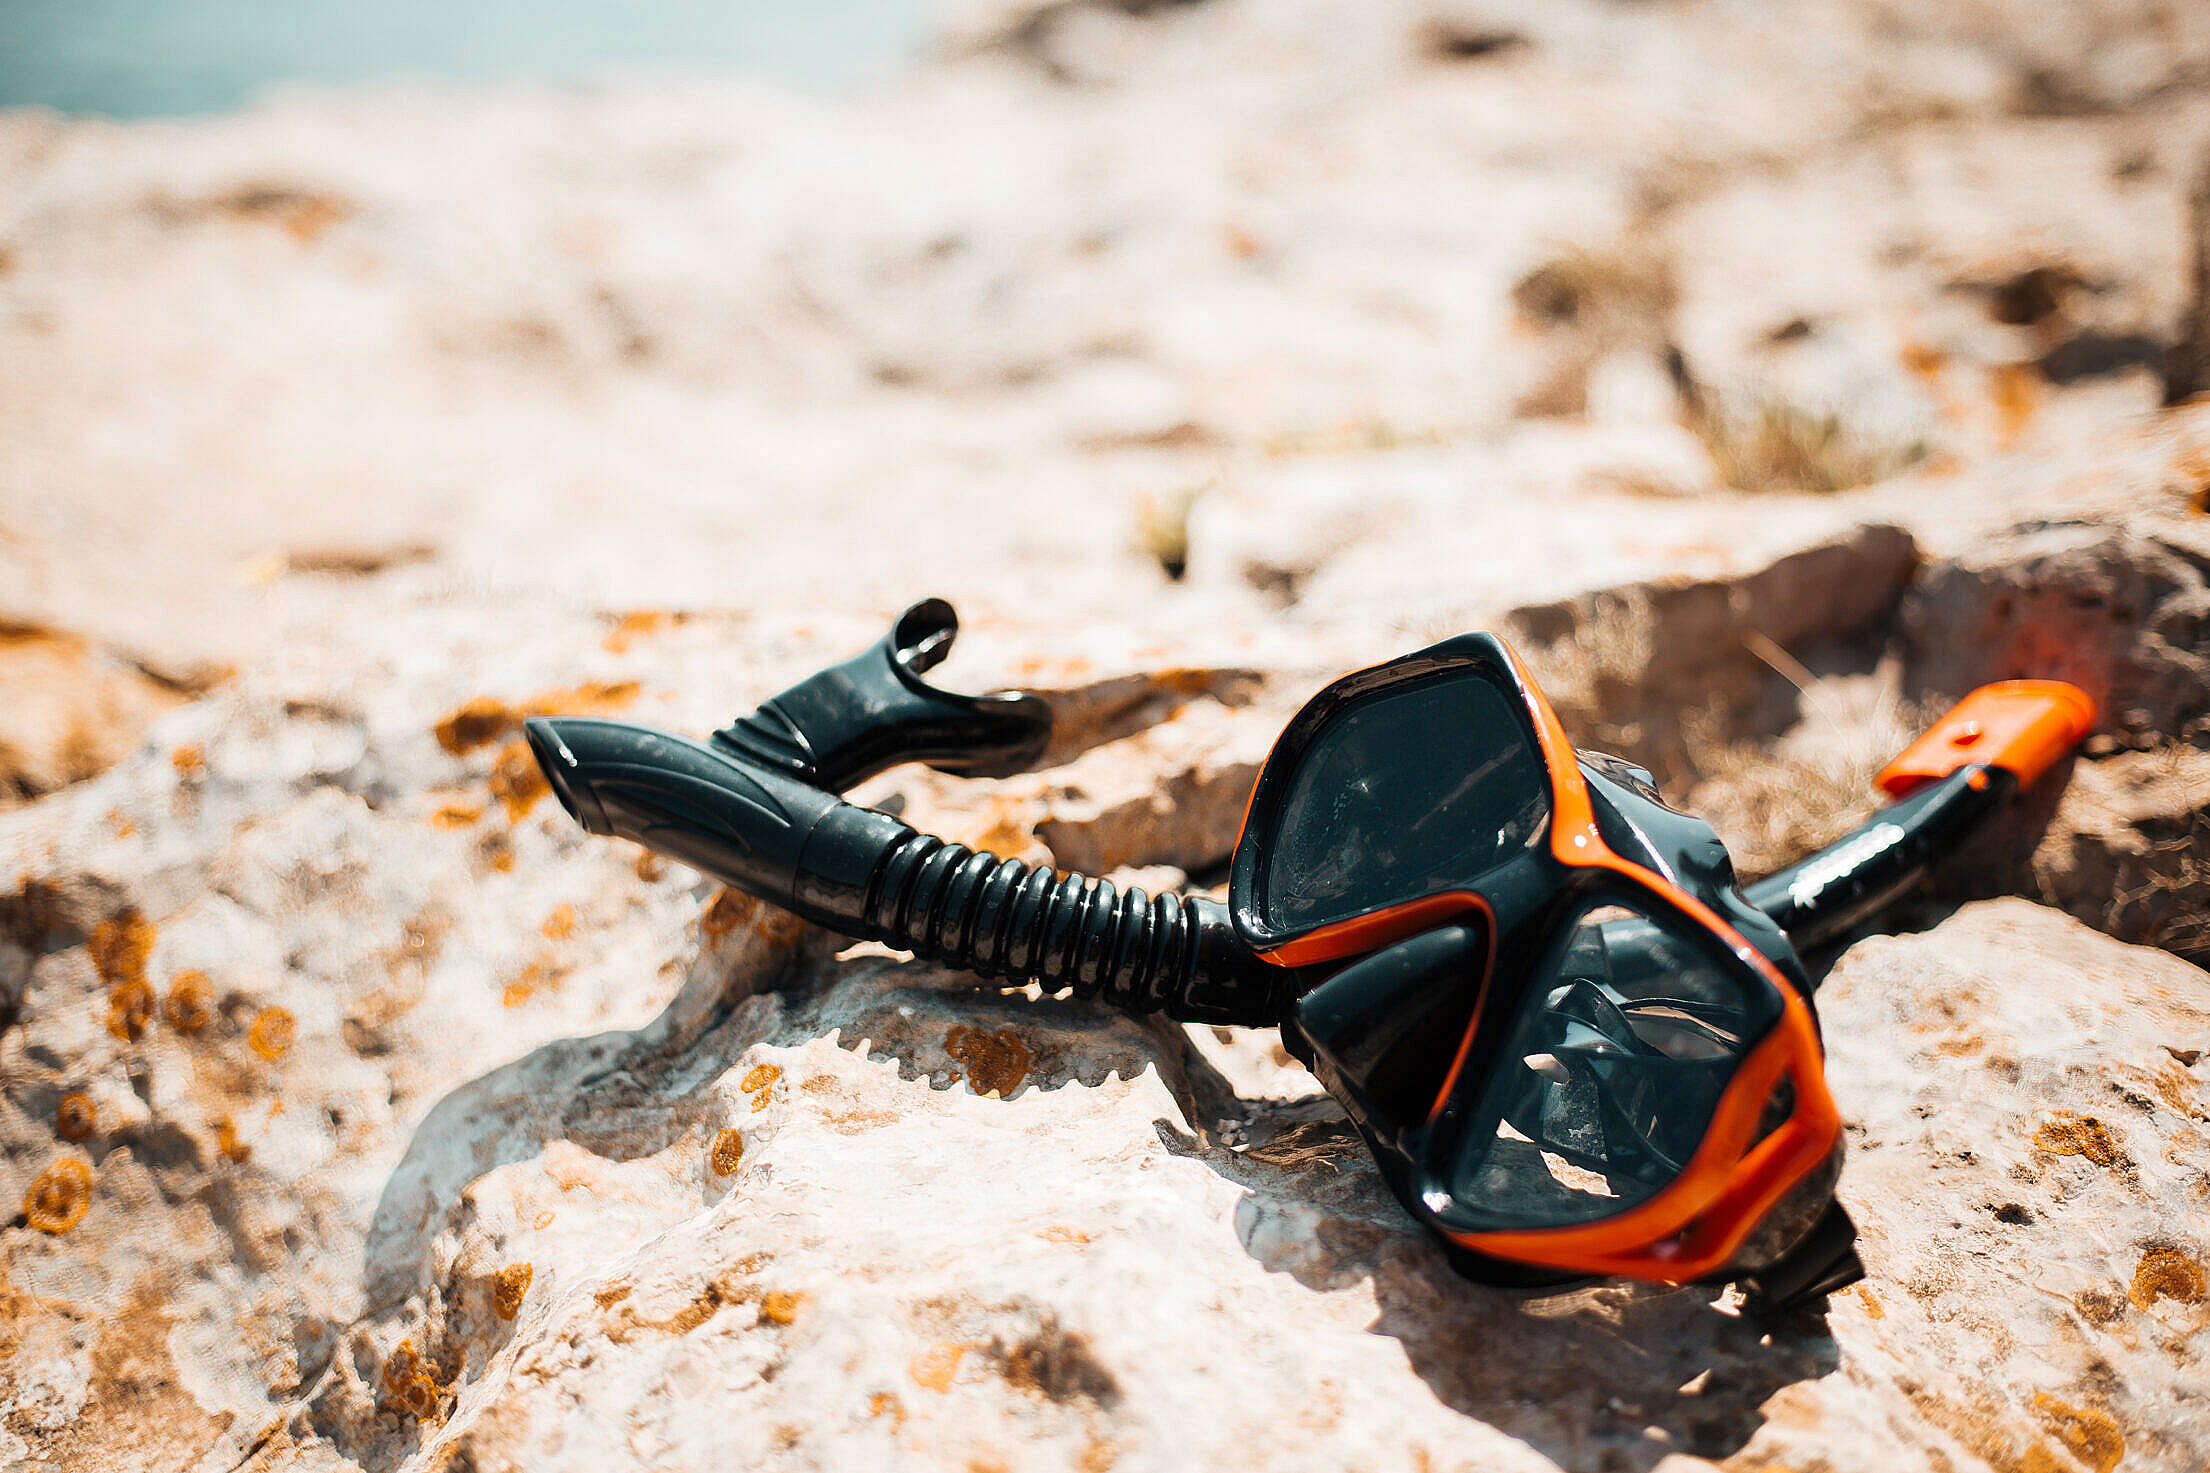 Snorkel and Diving Scuba Mask On a Rock Near The Sea Free Stock Photo